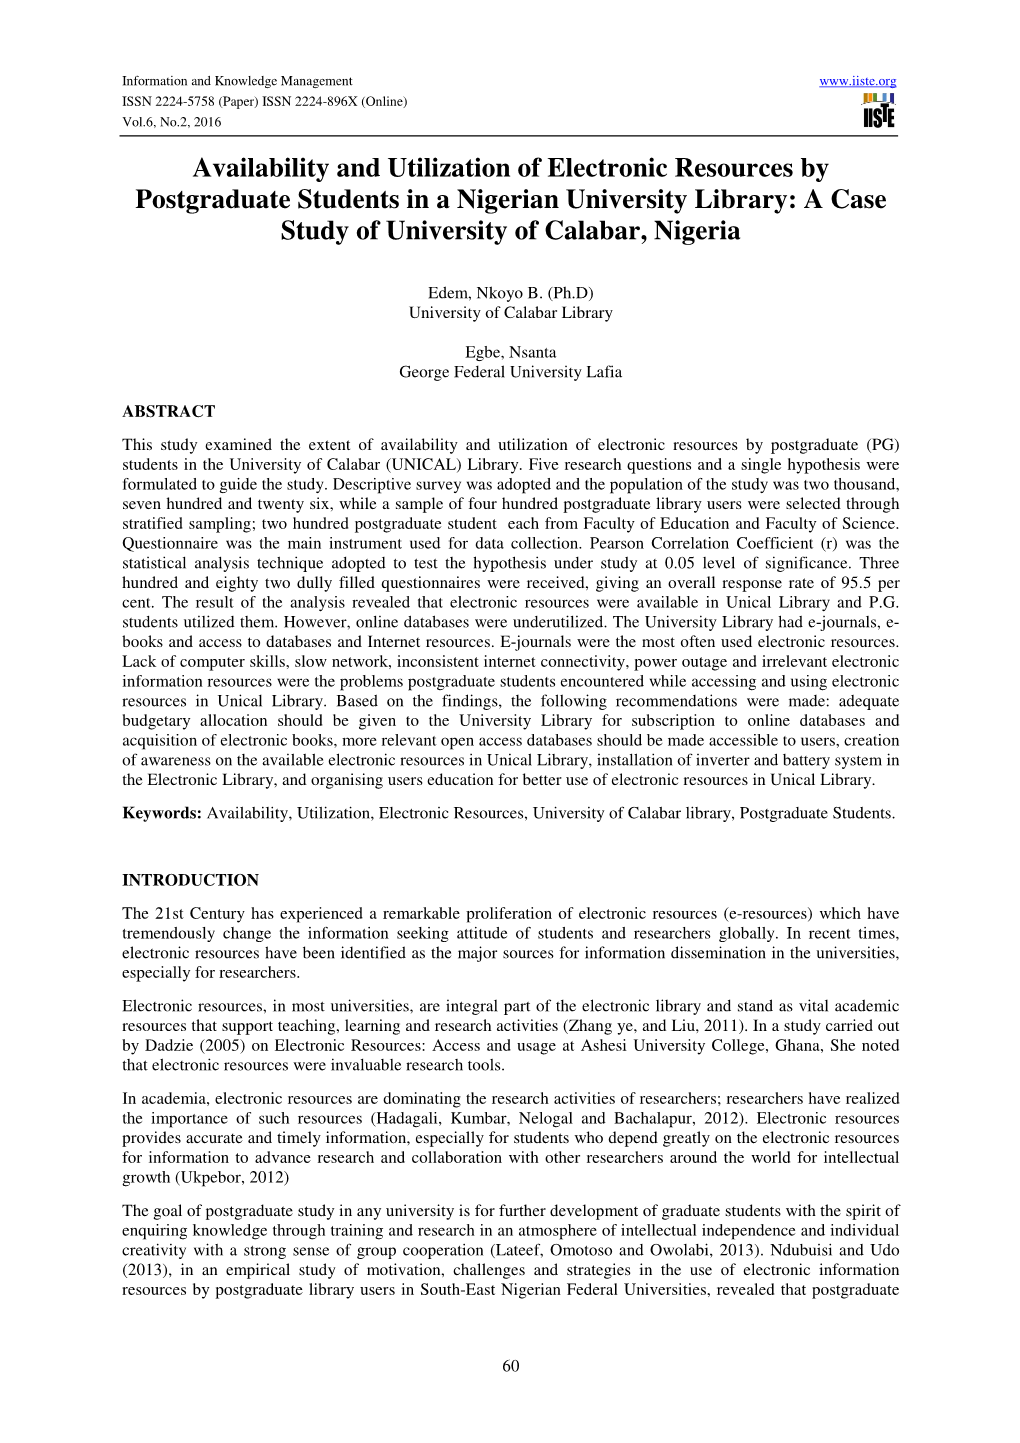 Availability and Utilization of Electronic Resources by Postgraduate Students in a Nigerian University Library: a Case Study of University of Calabar, Nigeria